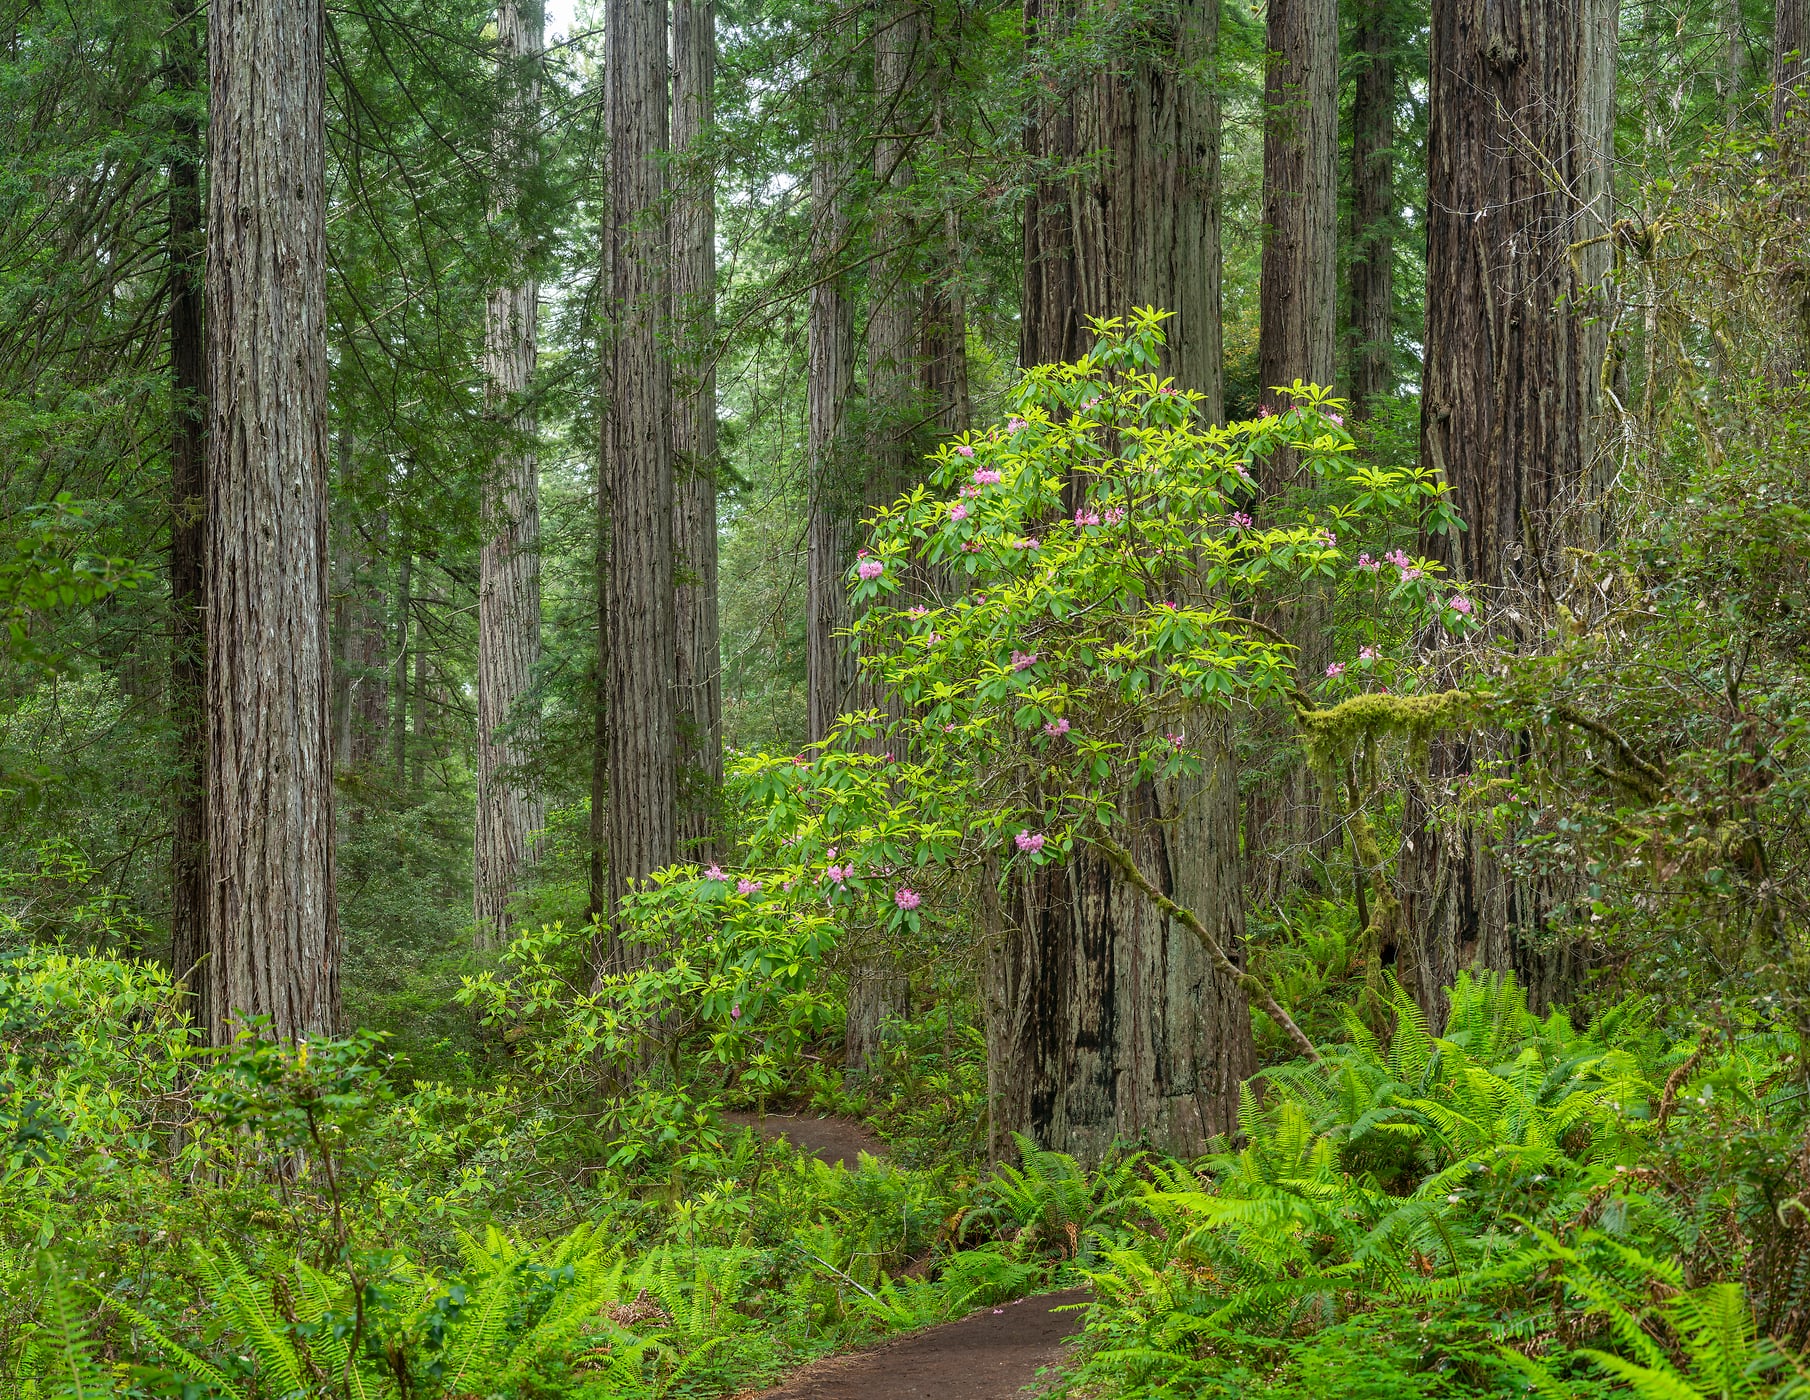 165 megapixels! A very high resolution, large-format VAST photo print of redwoods and rhododendrons along a hiking trail in a forest; nature photograph created by Greg Probst in Redwood National and State Parks, California